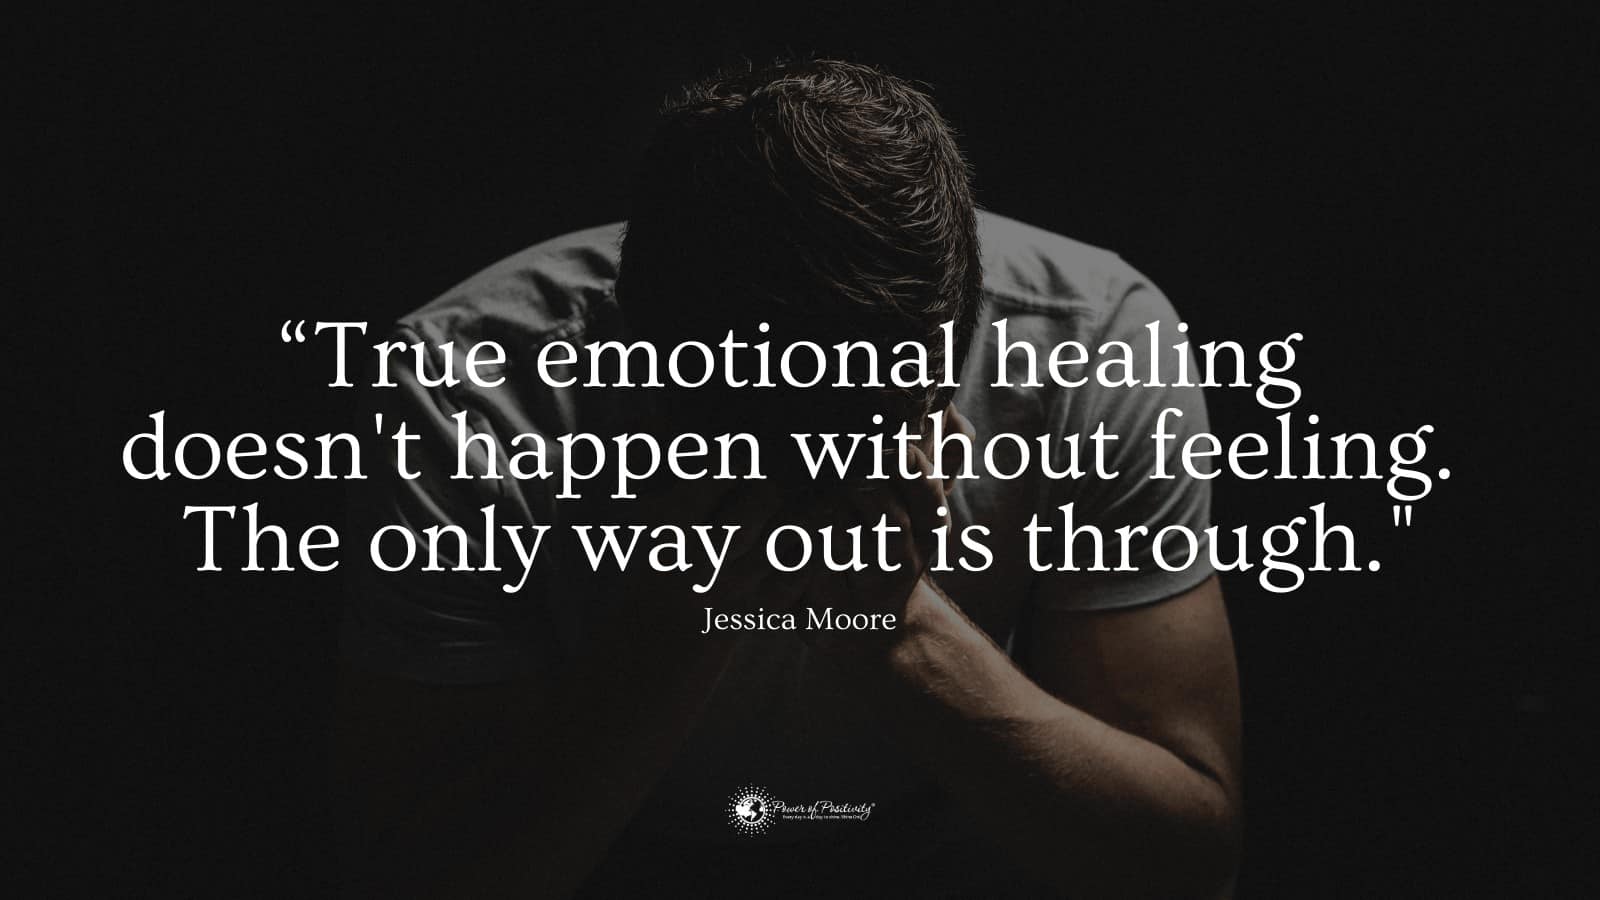 20 Quotes to Help People Recover from Emotional Turmoil